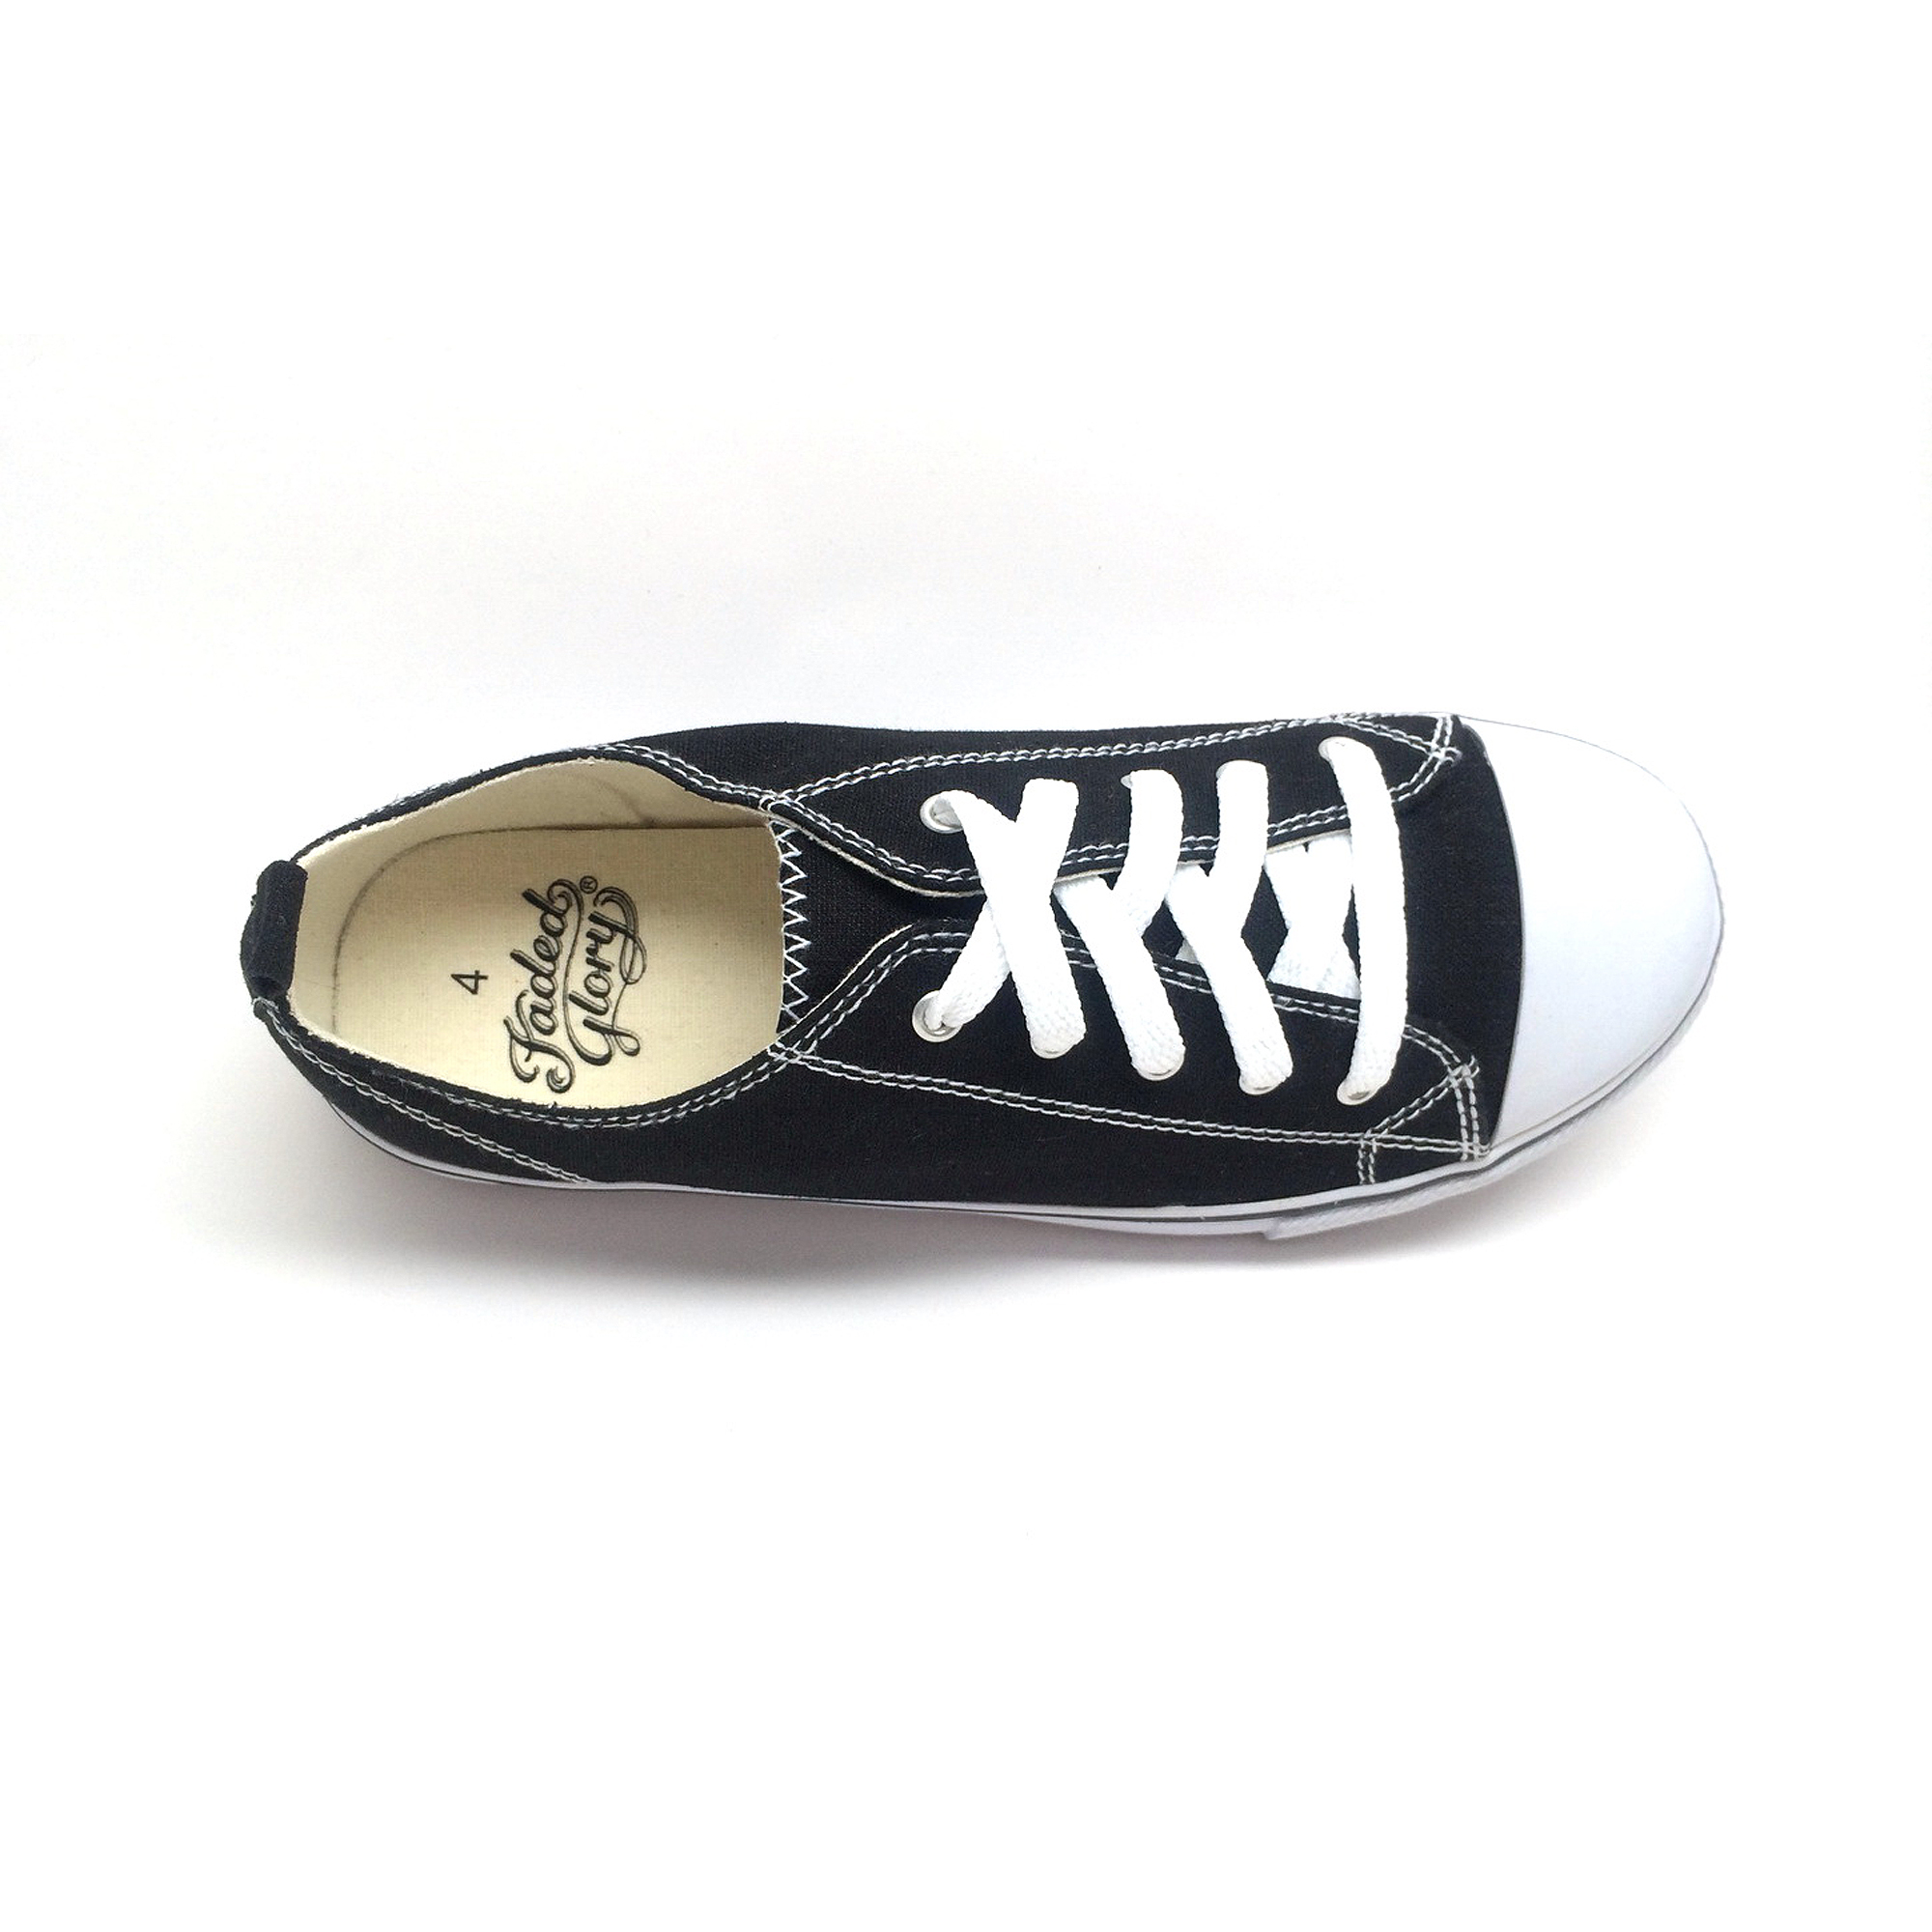 BOY'S CAPTOP LACE-UP SNEAKER - image 3 of 5